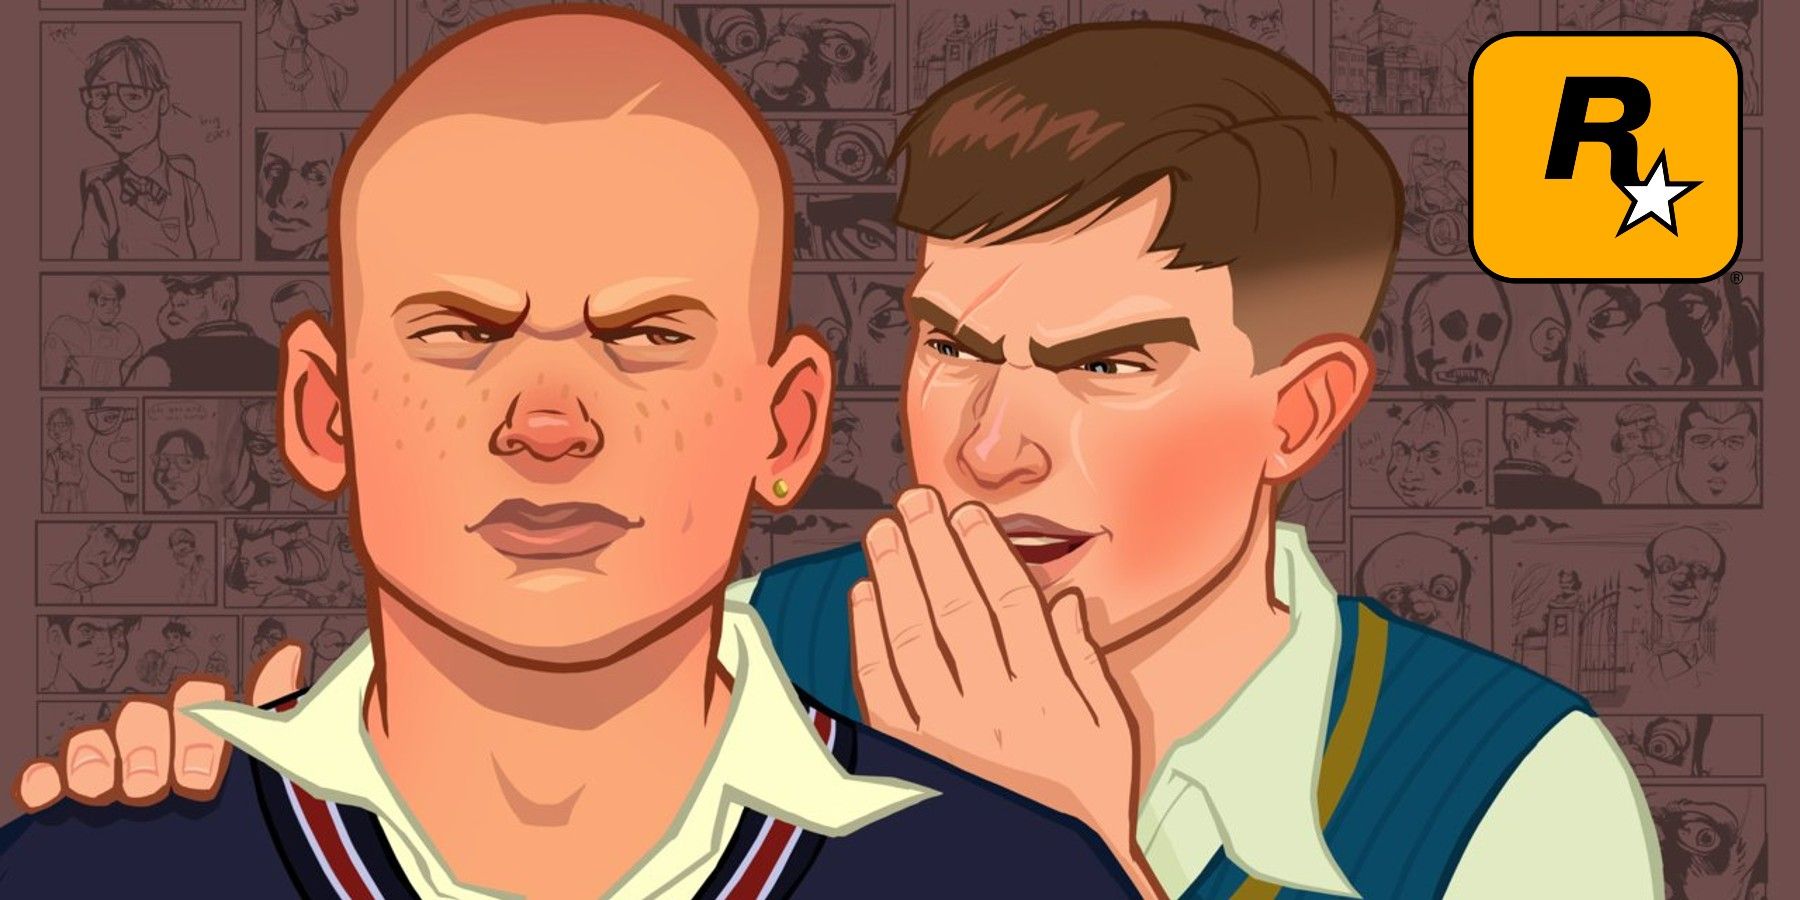 New Bully 2 Rumors Don't Have Much Weight